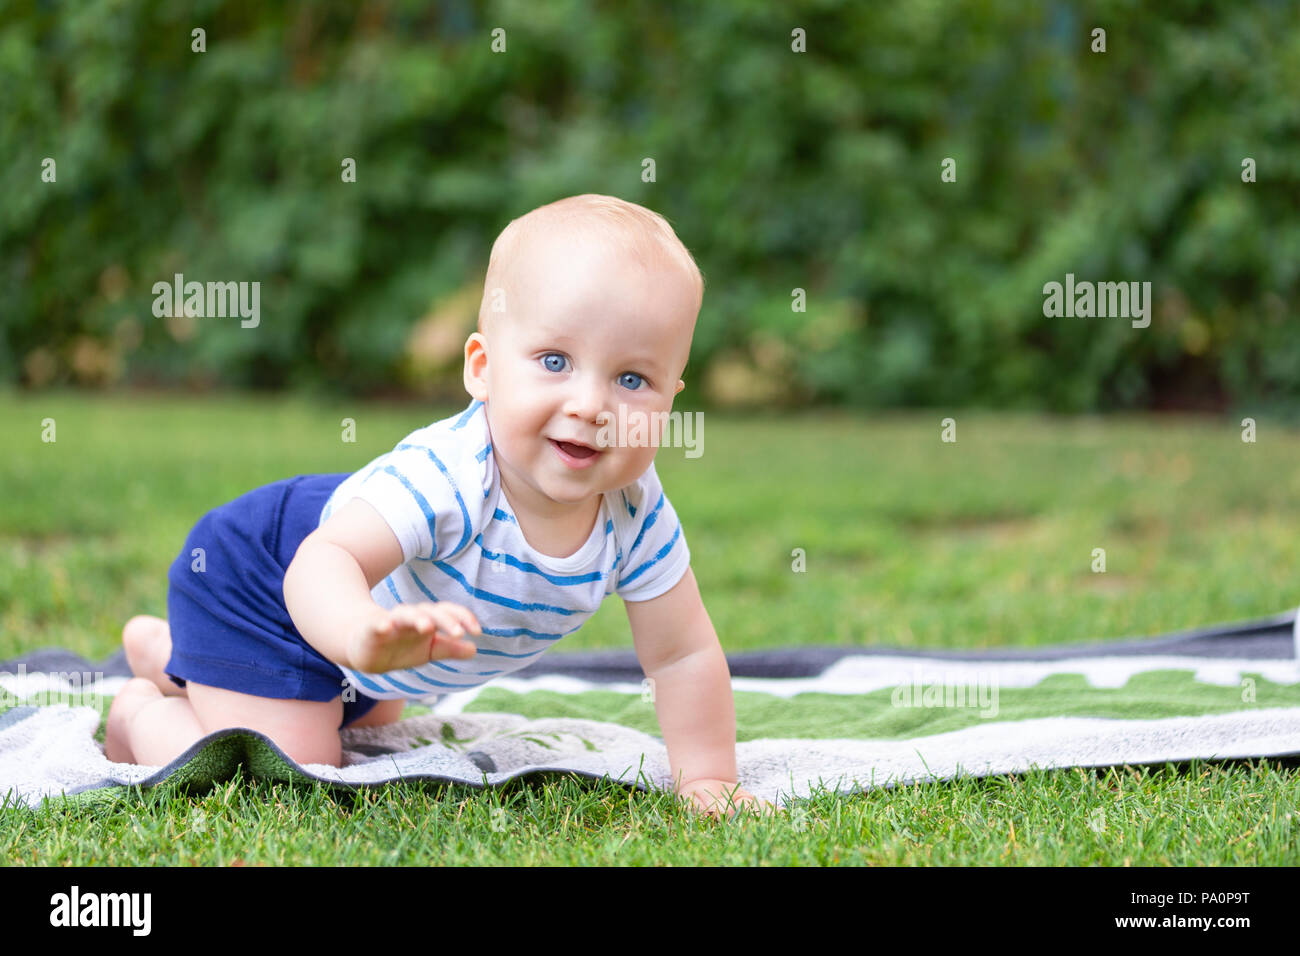 Cute little blond baby boy crawling on fresh green grass. Kid having fun making first steps on mowed natural lawn. Happy and healthy childhood concept Stock Photo